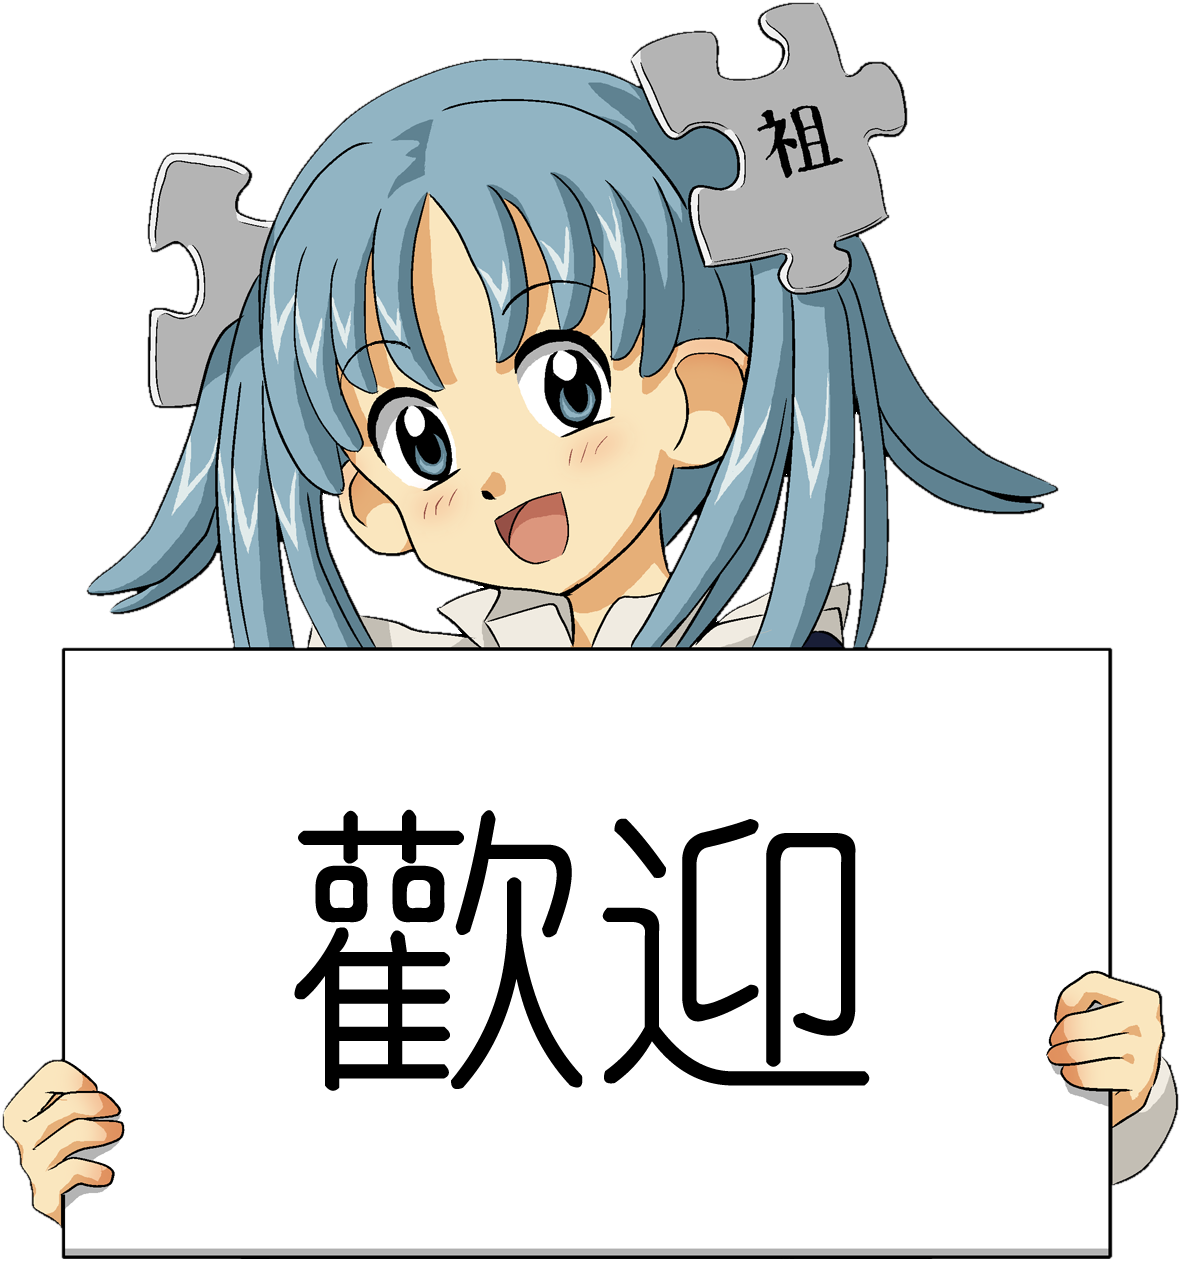 Wikipe-tan Holding A Welcome Sign Cropped - Anime Girl Holding Sign (1181x1263)